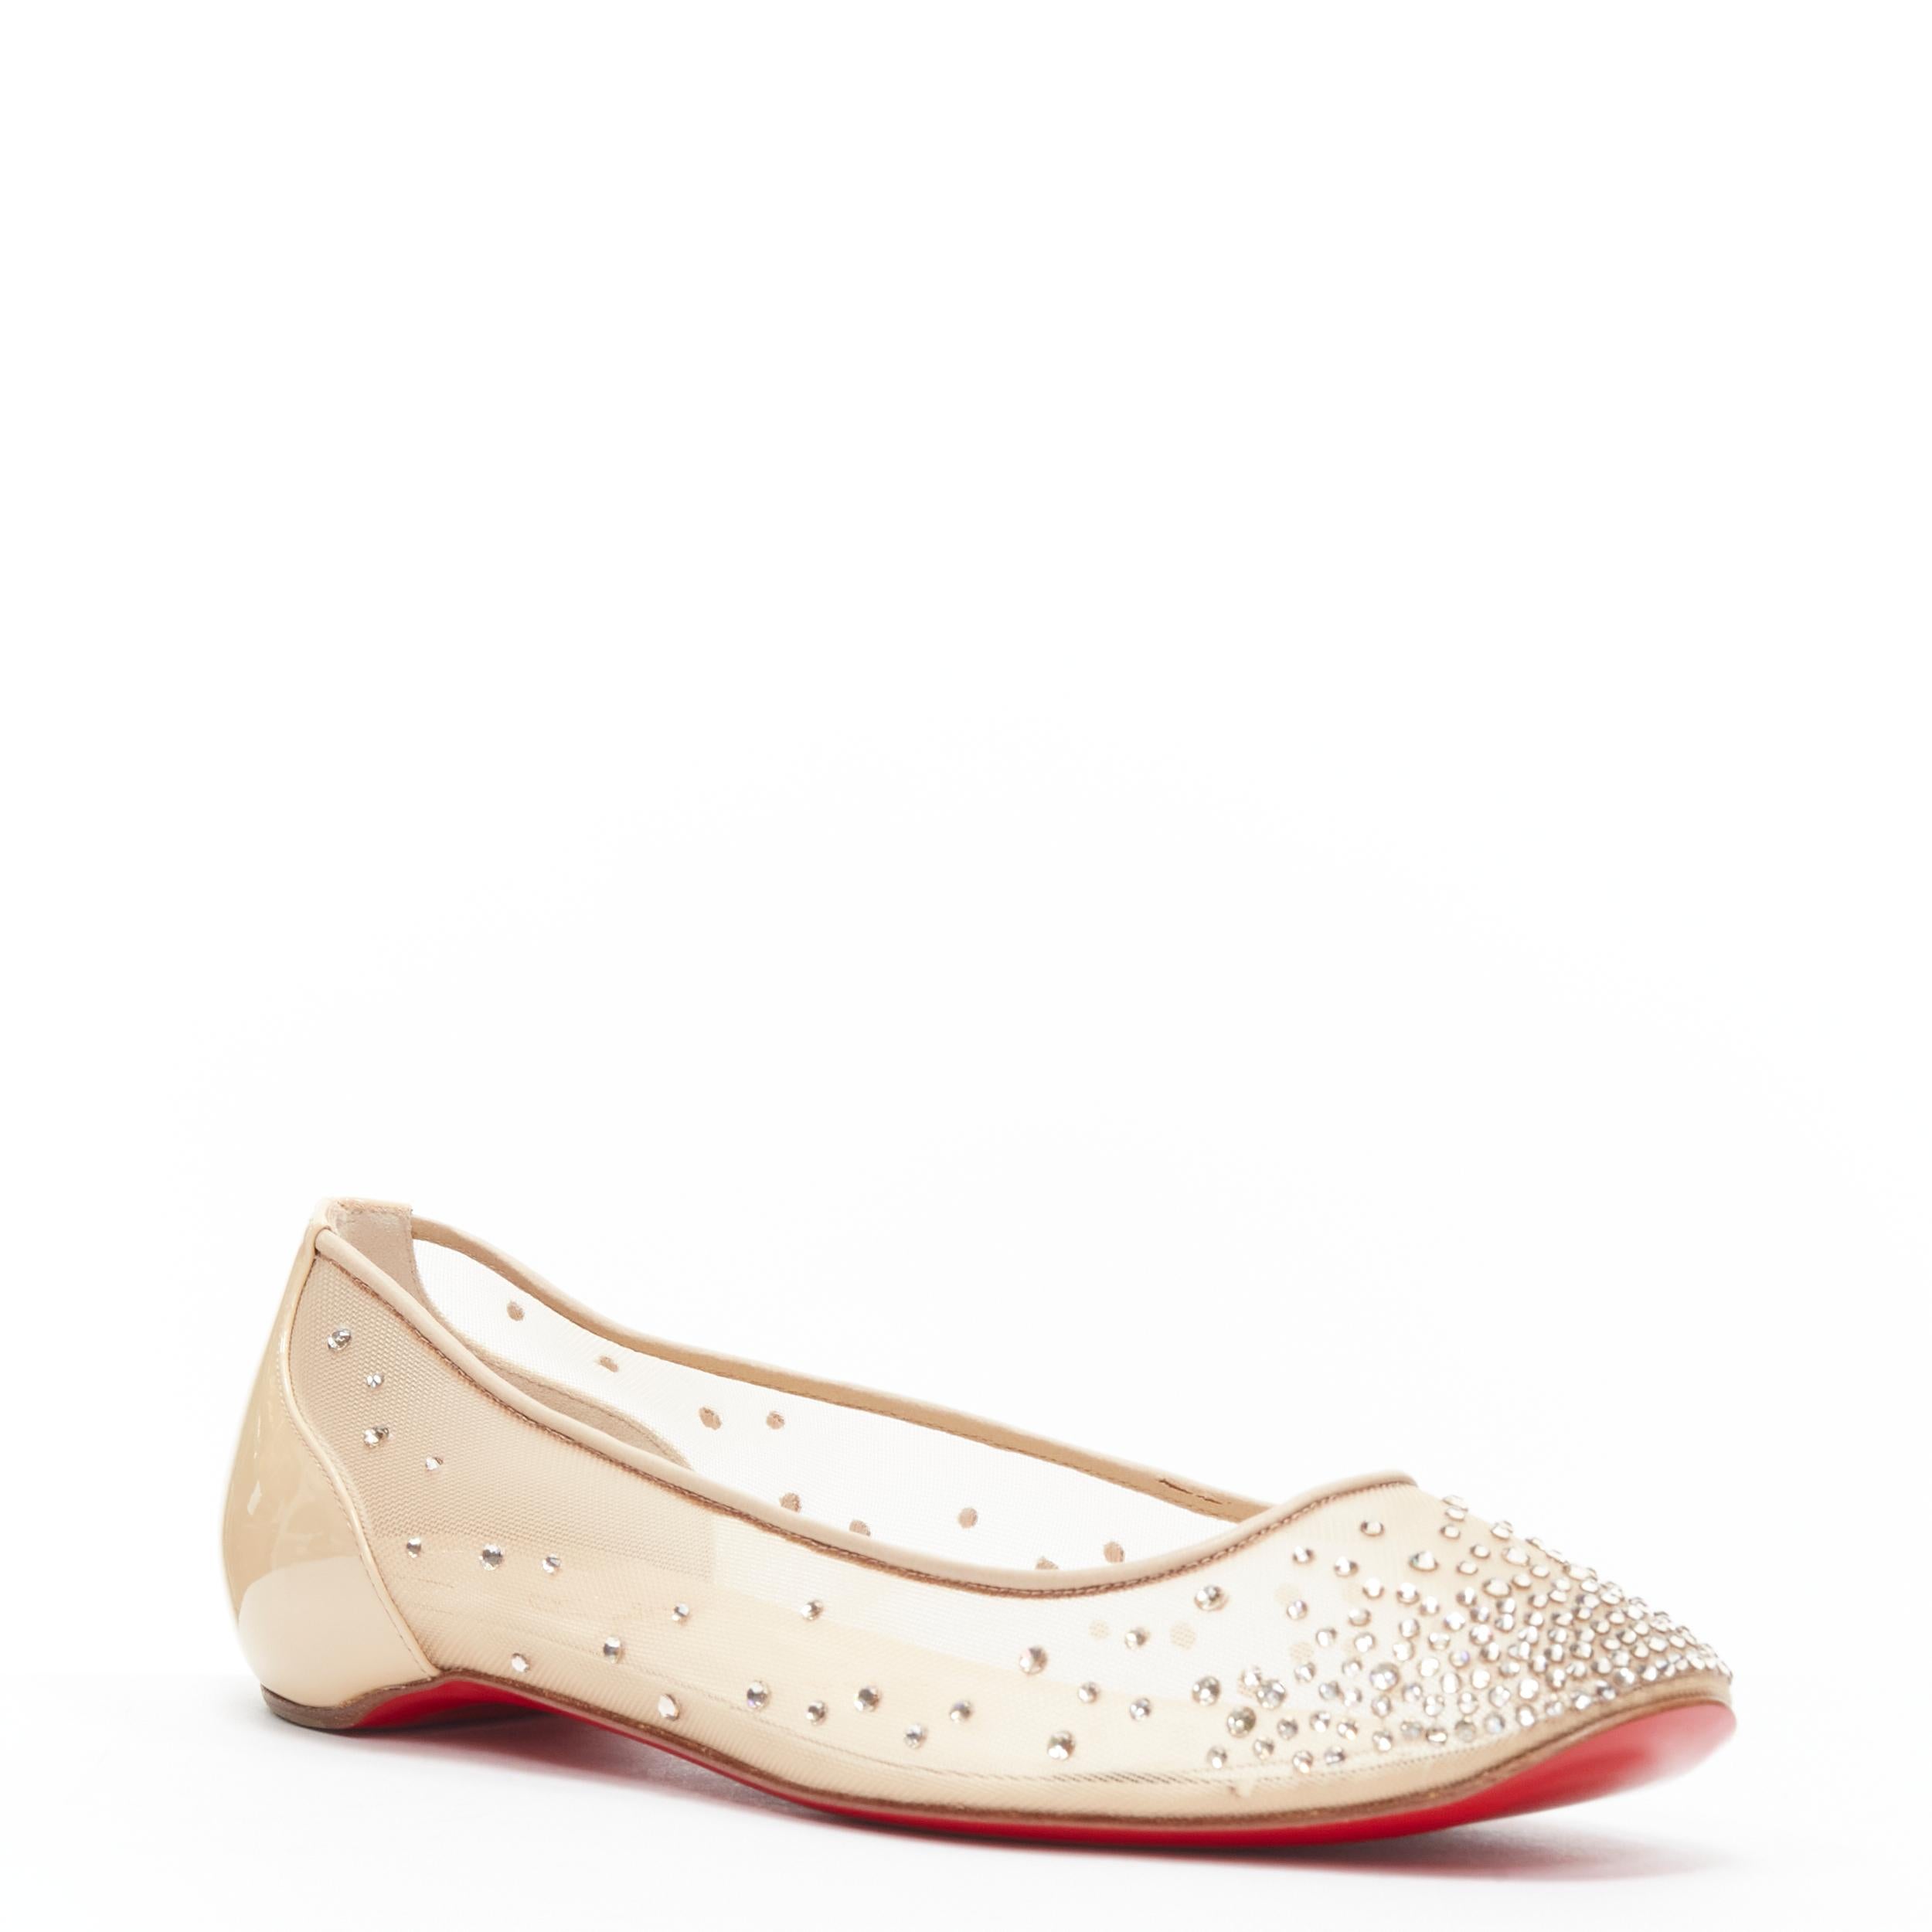 new CHRISTIAN LOUBOUTIN Patinotte Strass crystal embellished nude flats EU37.5 
Reference: TGAS/B02093 
Brand: Christian Louboutin 
Designer: Christian Louboutin 
Model: Patinotte 
Material: Patent Leather 
Color: Beige 
Pattern: Solid 
Extra